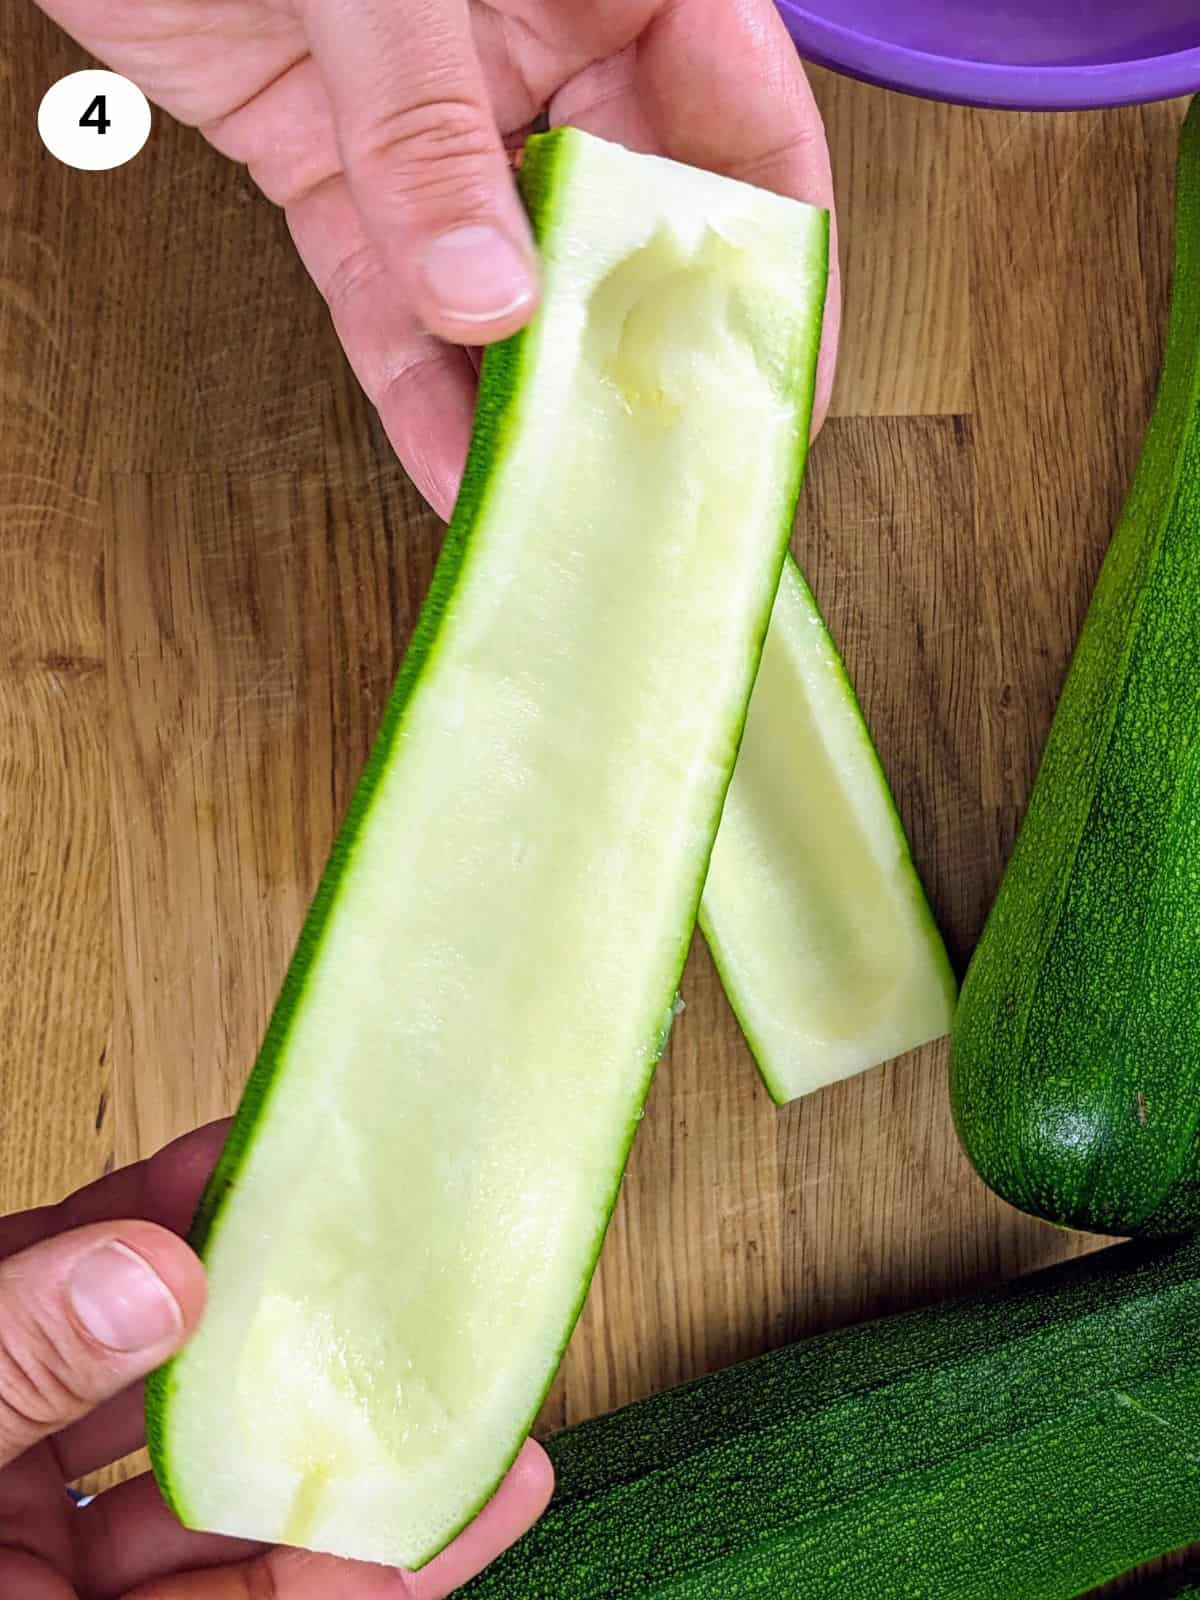 Removing the flesh from the zucchini